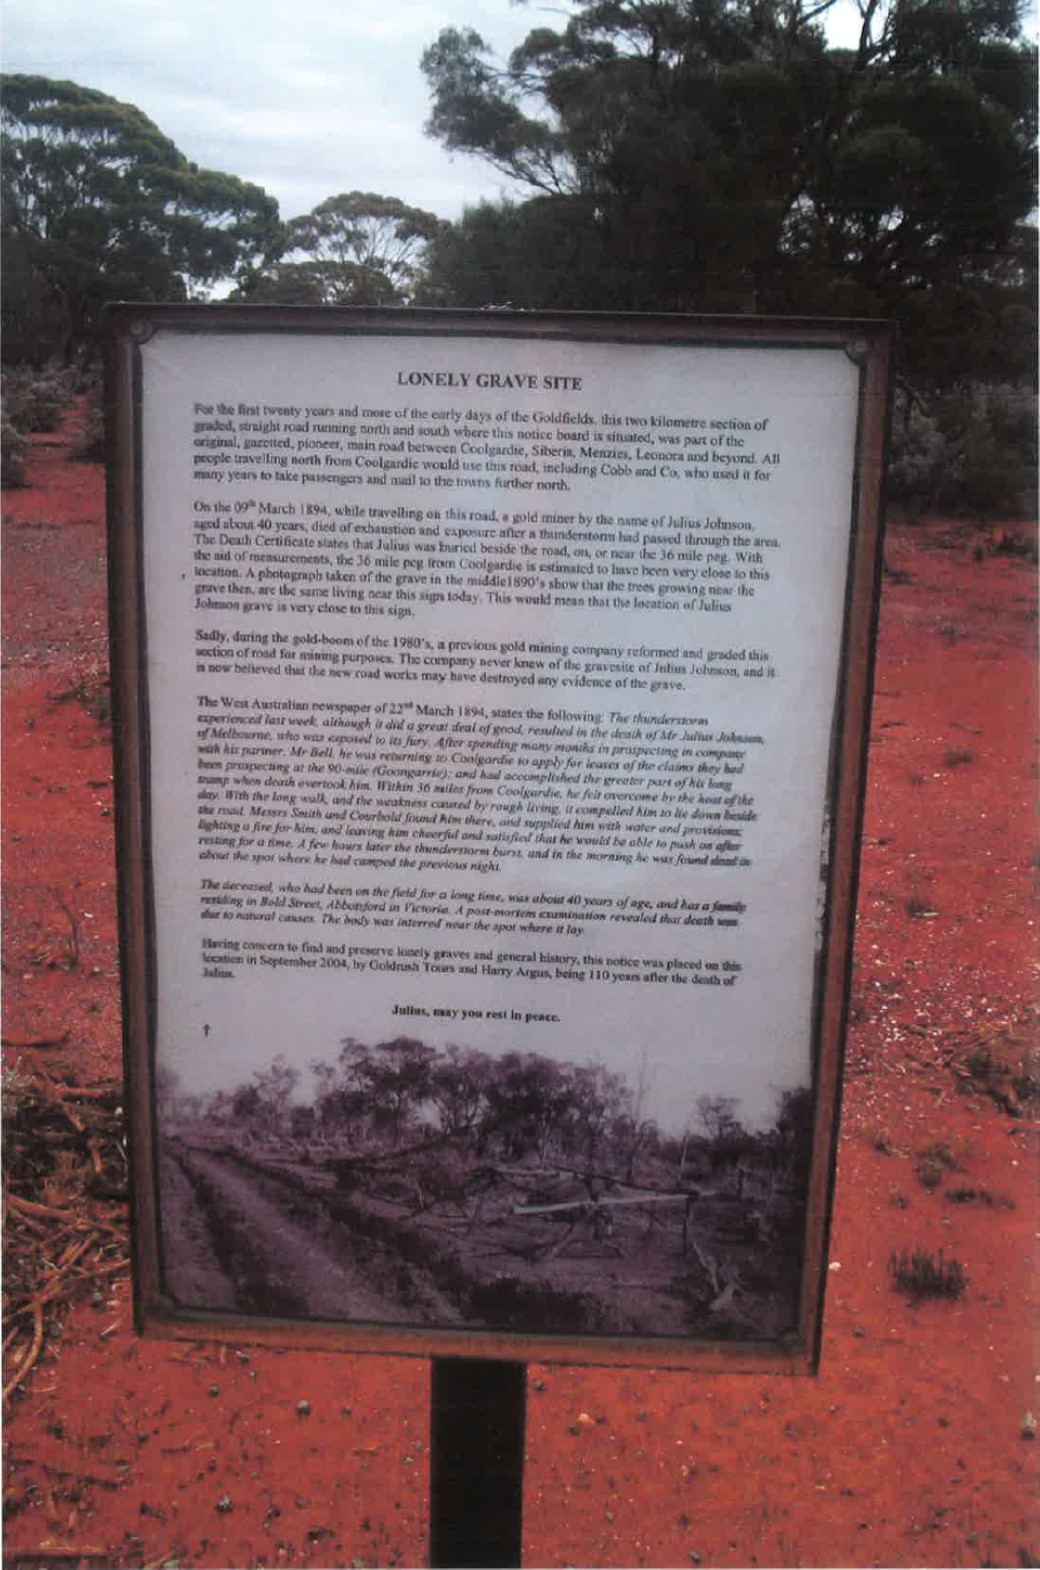 This is a photograph of the plaque containing the story of Julius JOHNSON.